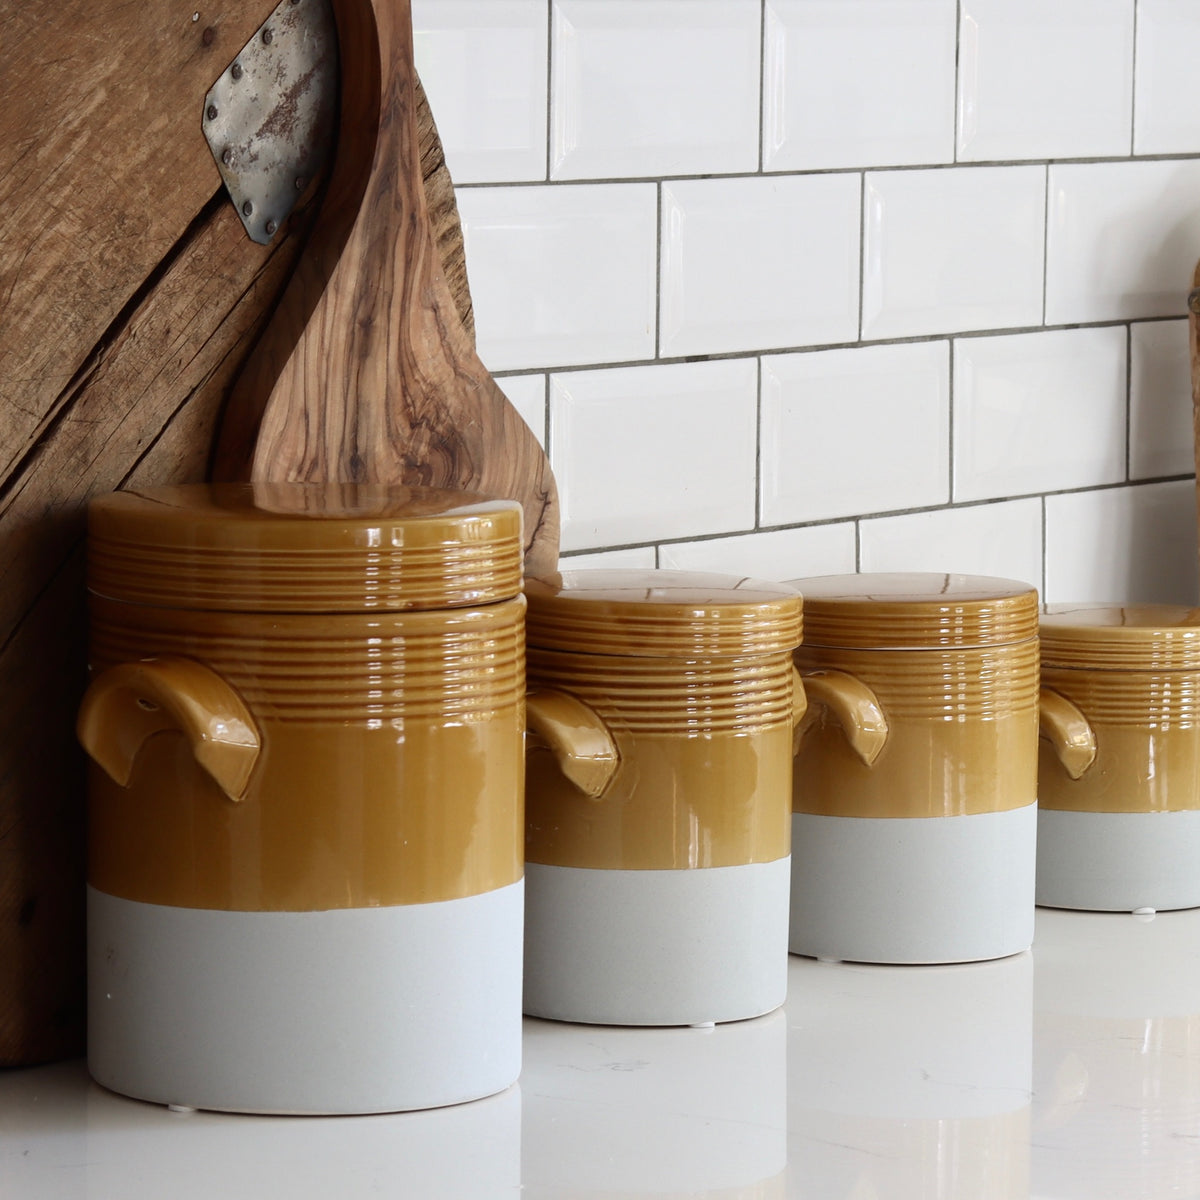 HH French Replica Ochre Dip Confit Canisters - Set of 4 - Holistic Habitat 